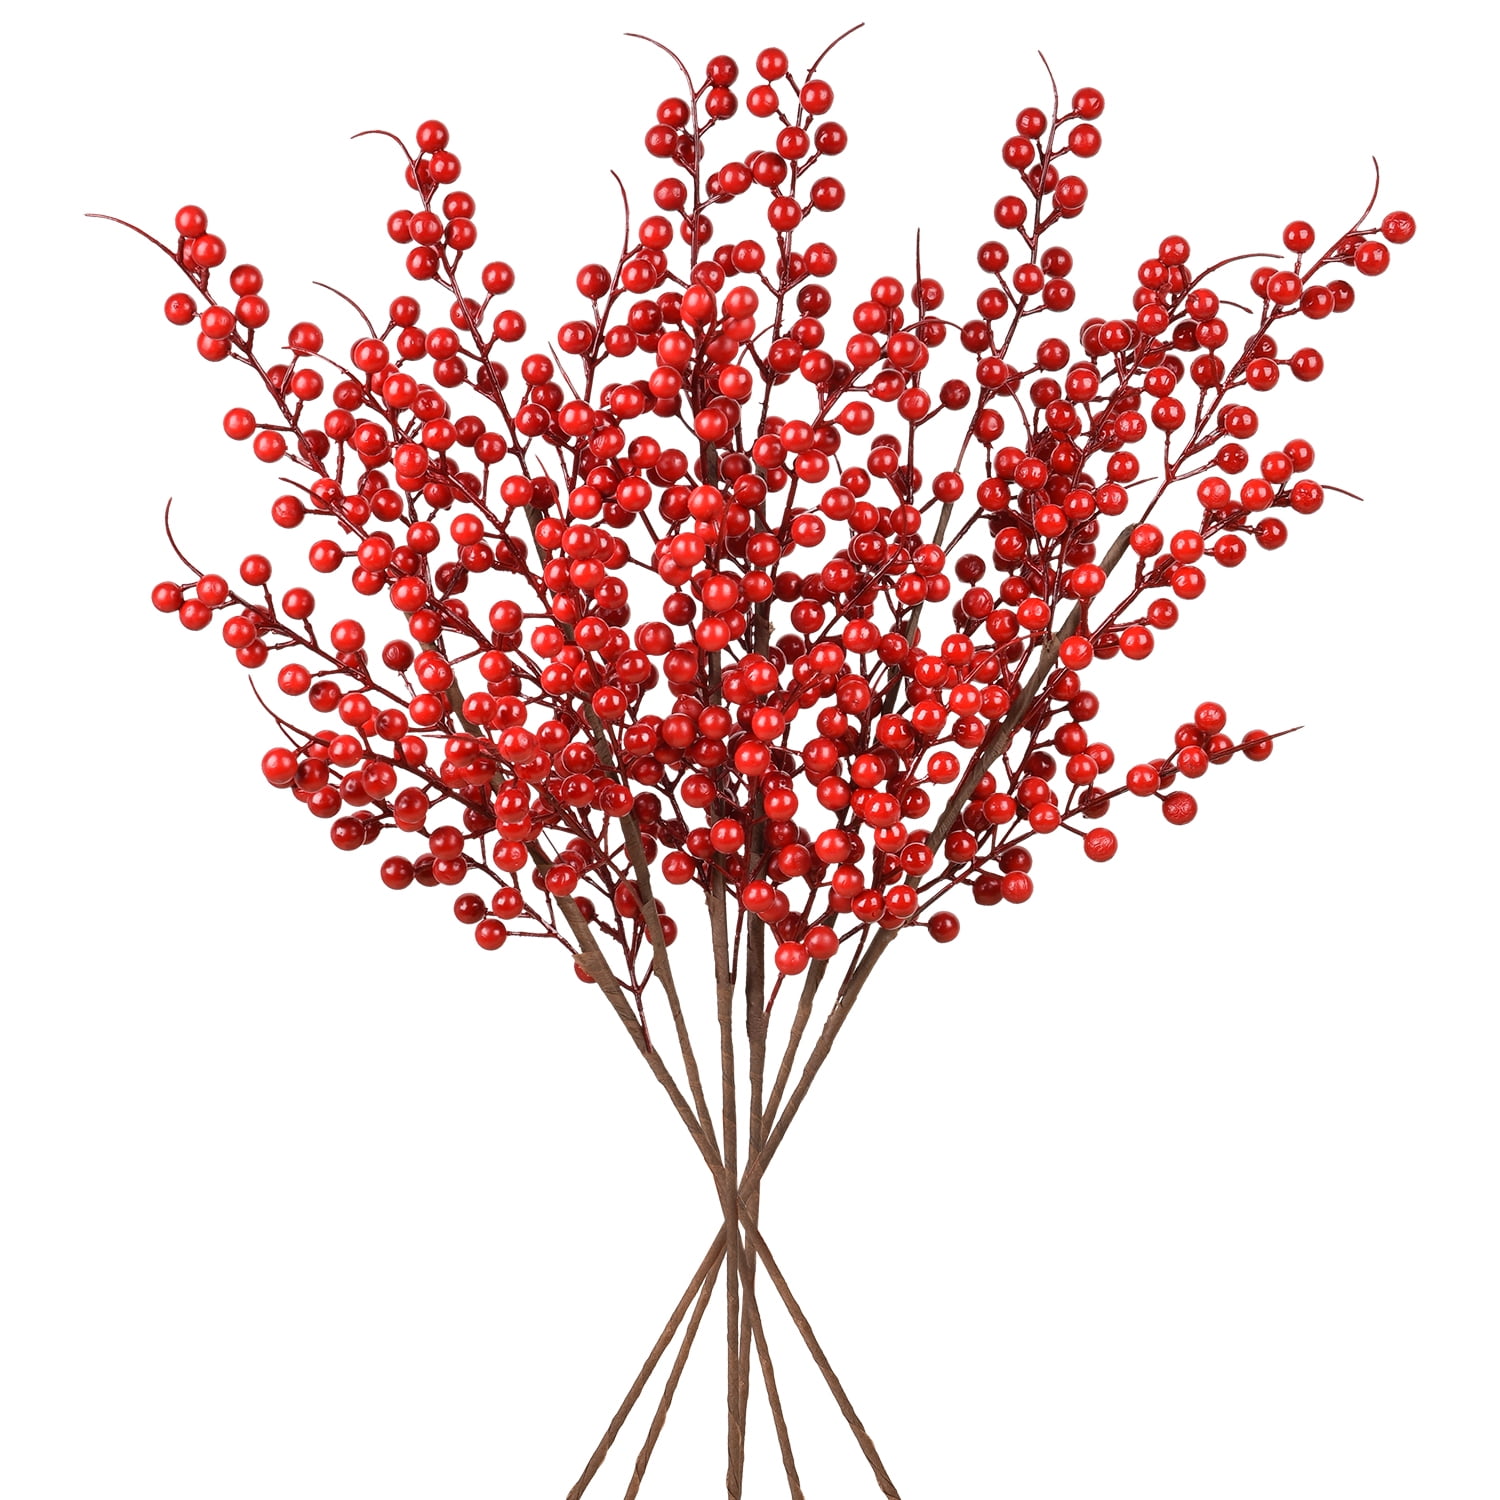 QIFEI 6Pcs Artificial Red Berry Stems, 7.87 Inch Burgundy Red Berry Picks  Holly Berries Branches for Christmas Tree Decorations Crafts Wedding  Holiday Season Winter Décor Home Decor 